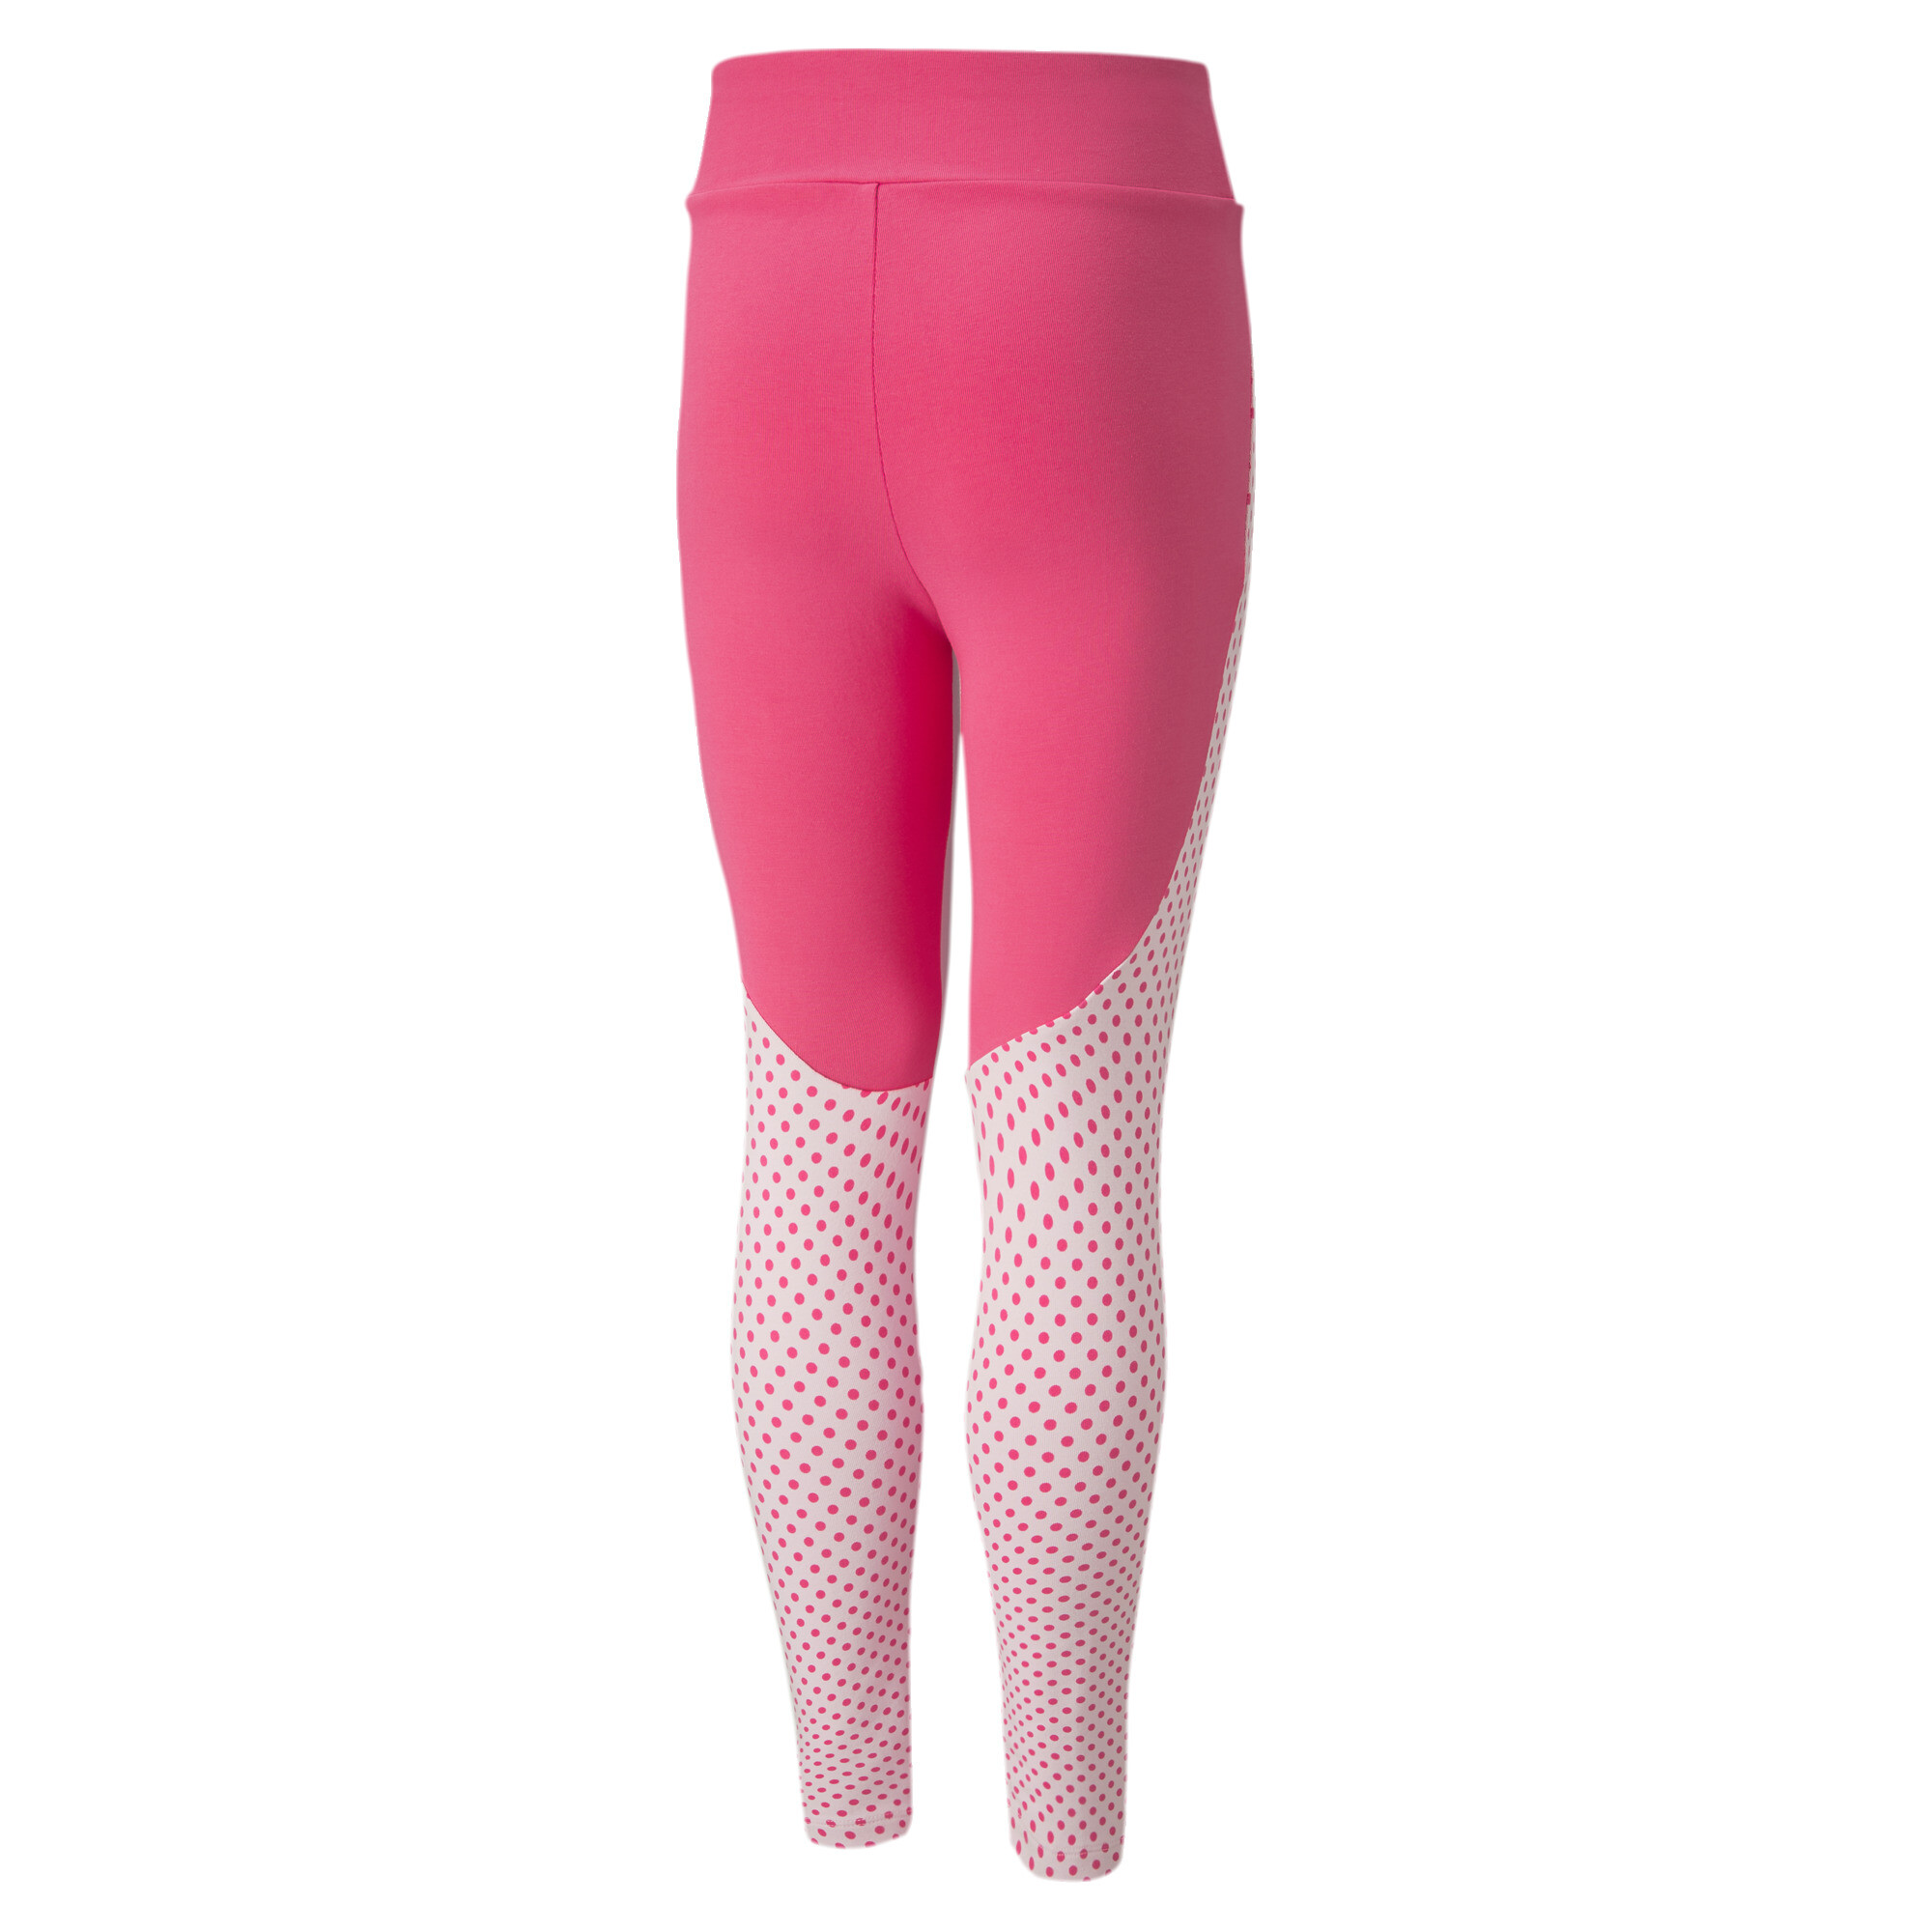 PUMA X MIRACULOUS Leggings In Pink, Size 9-10 Youth